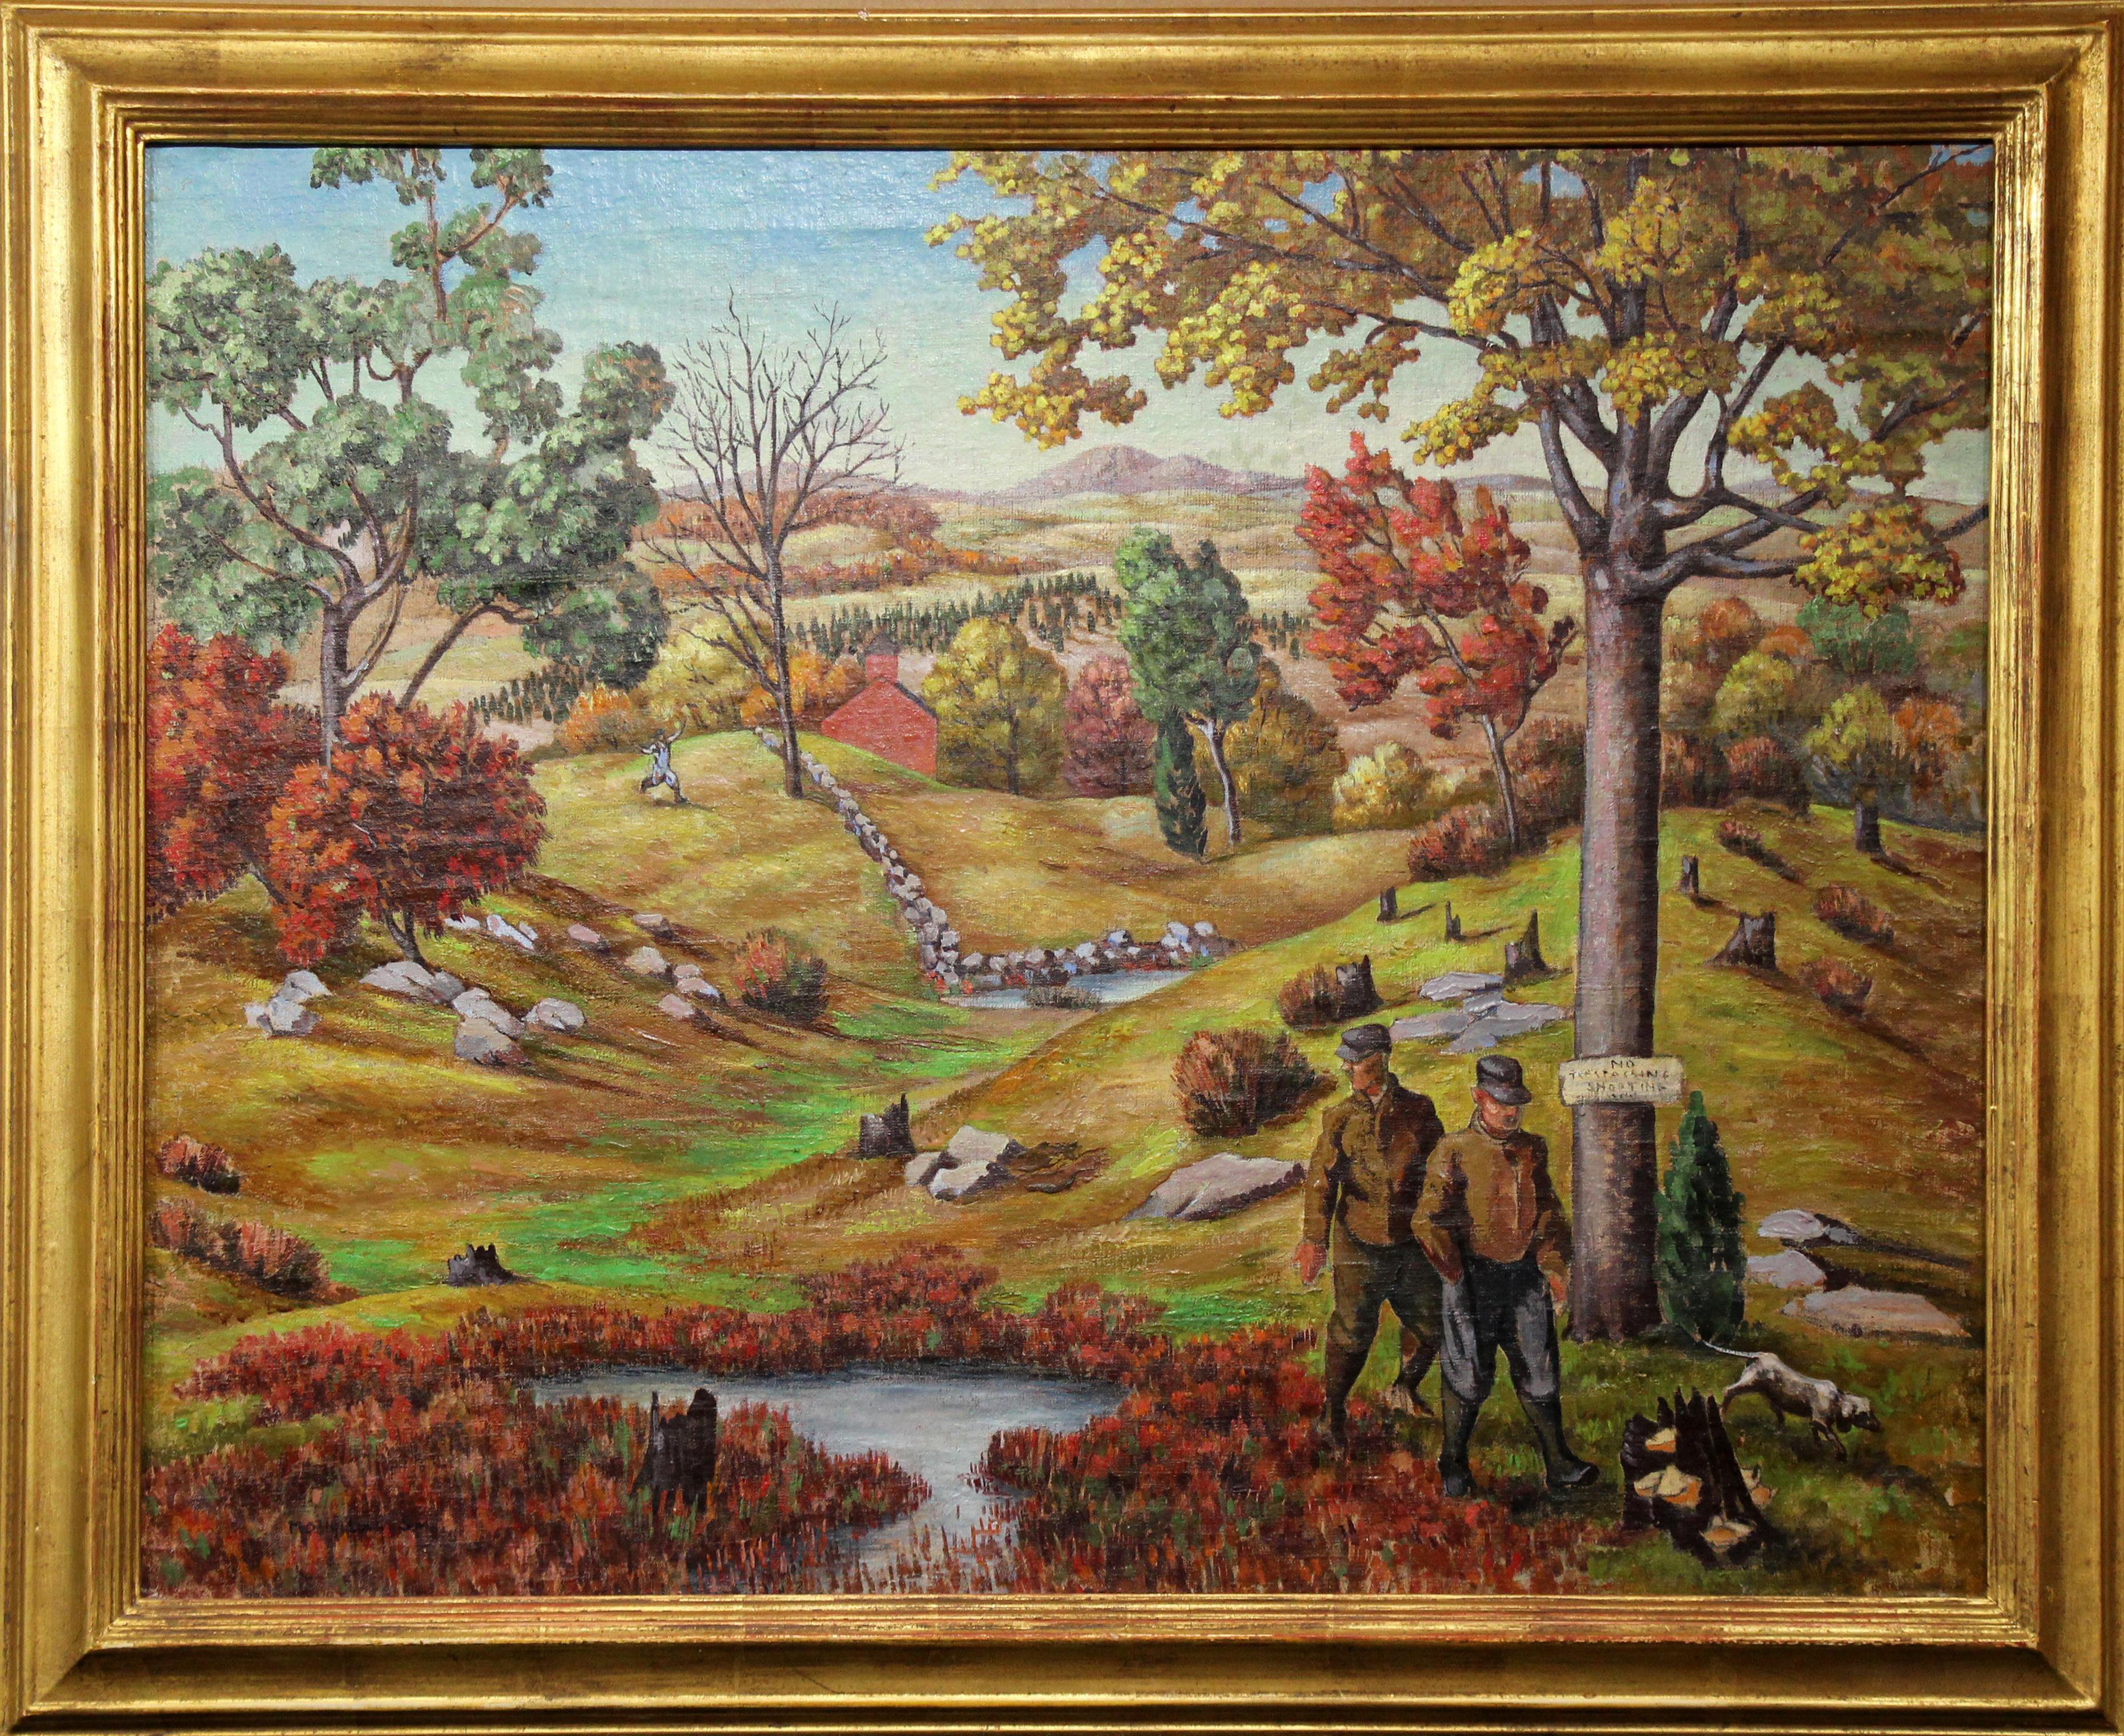 No Trespassing, Autumn Landscape and Hunters by Female American Realist Artist - Painting by Molly Luce